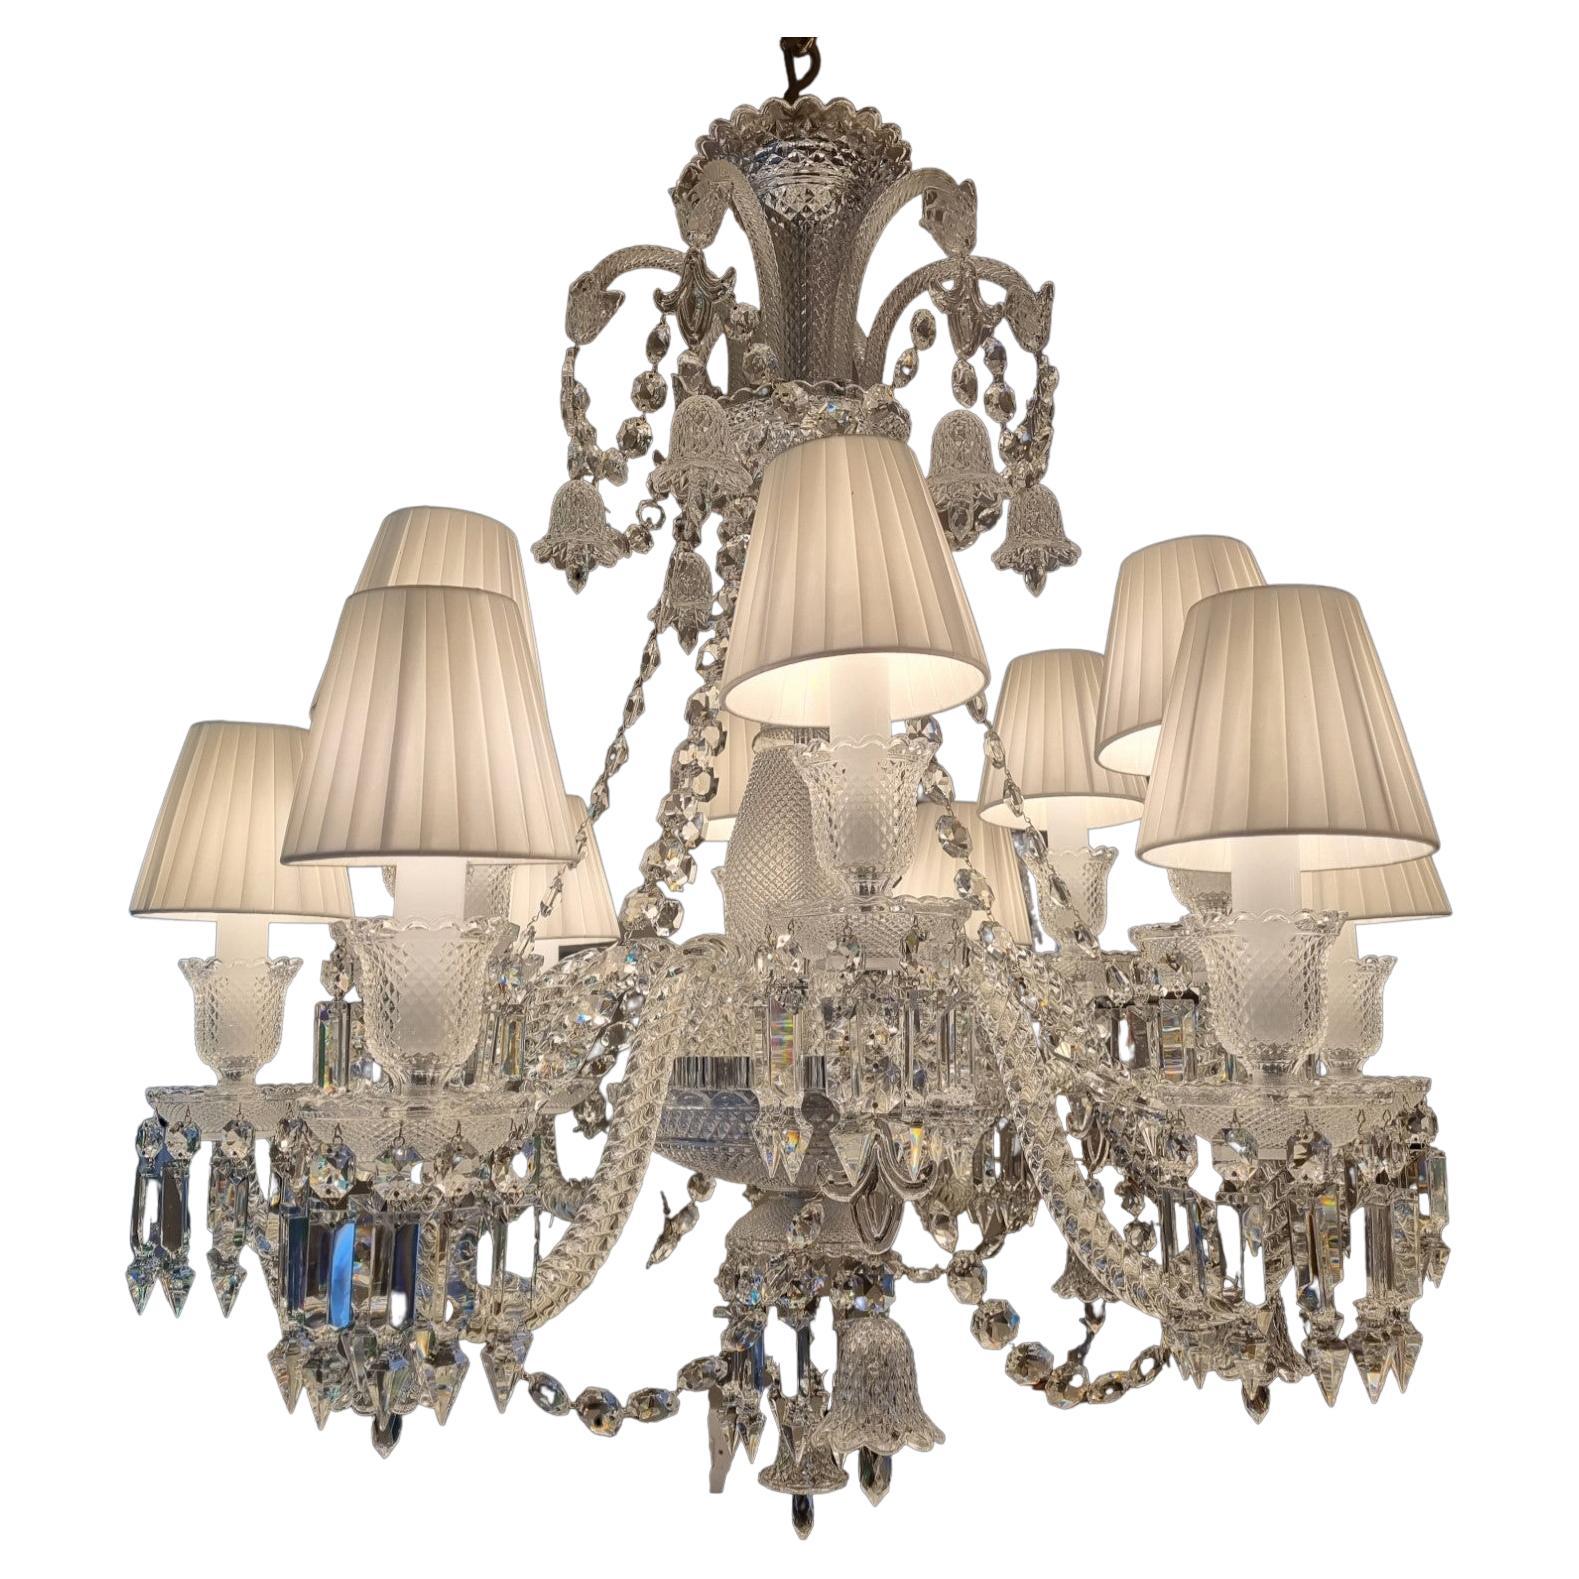 Fabulous Baccarat Crystal Chandelier
This Chandelier has a beautiful Cut Crystal Central Stem and Each Arm has Sparkling Crystal Pendants that Reflect Beautifly When Lit
Baccarats single Red Crystal Displayed Discreetly 
Theres a Waiting list to buy